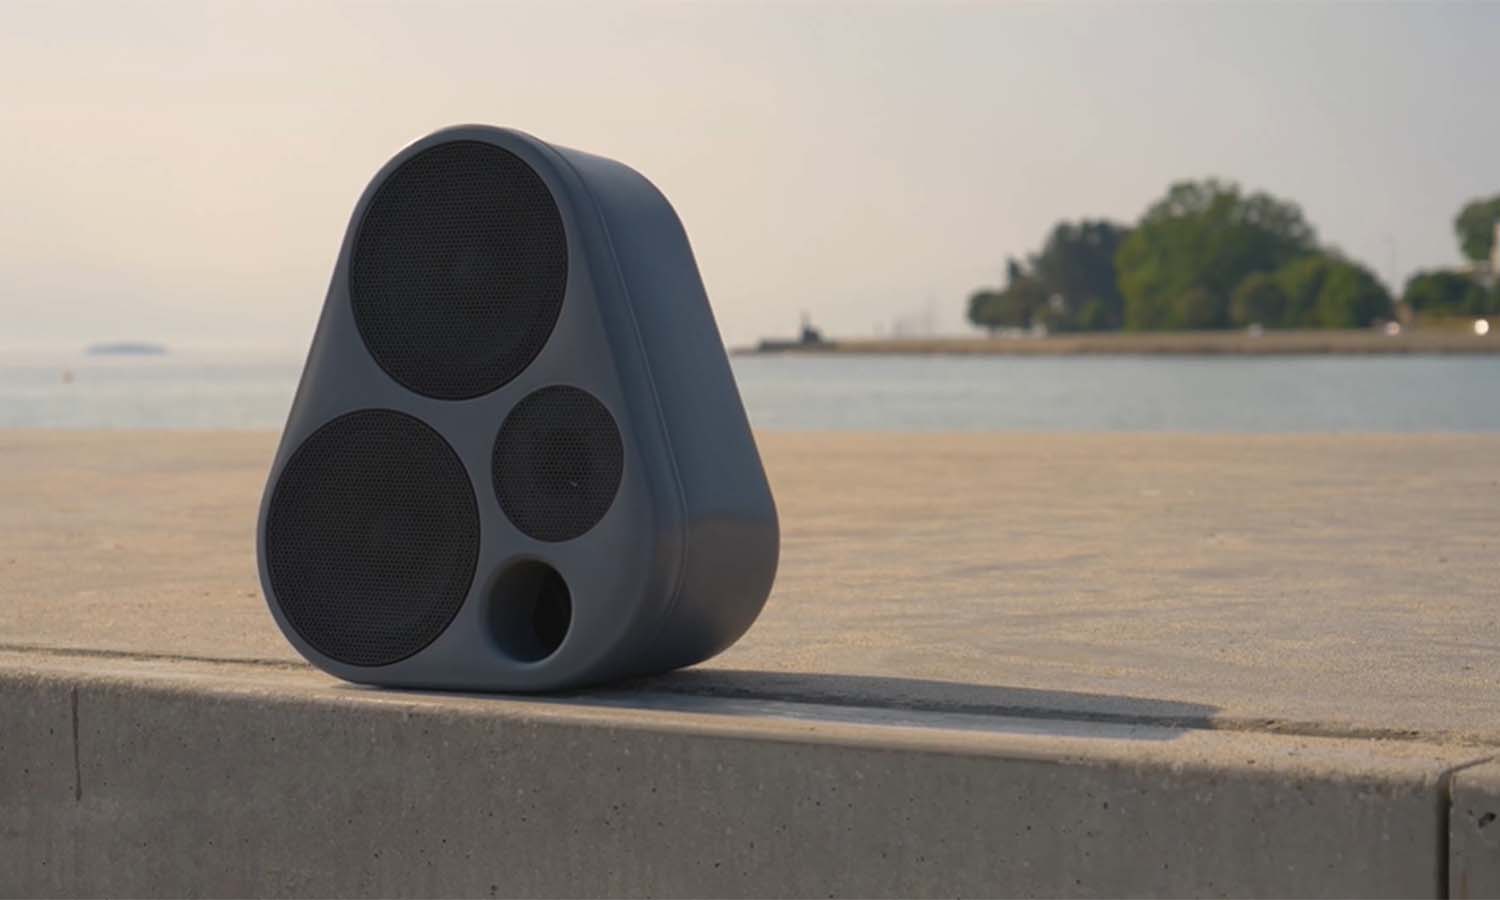 The Enkl Sound speaker at the beach and for outdoor events.